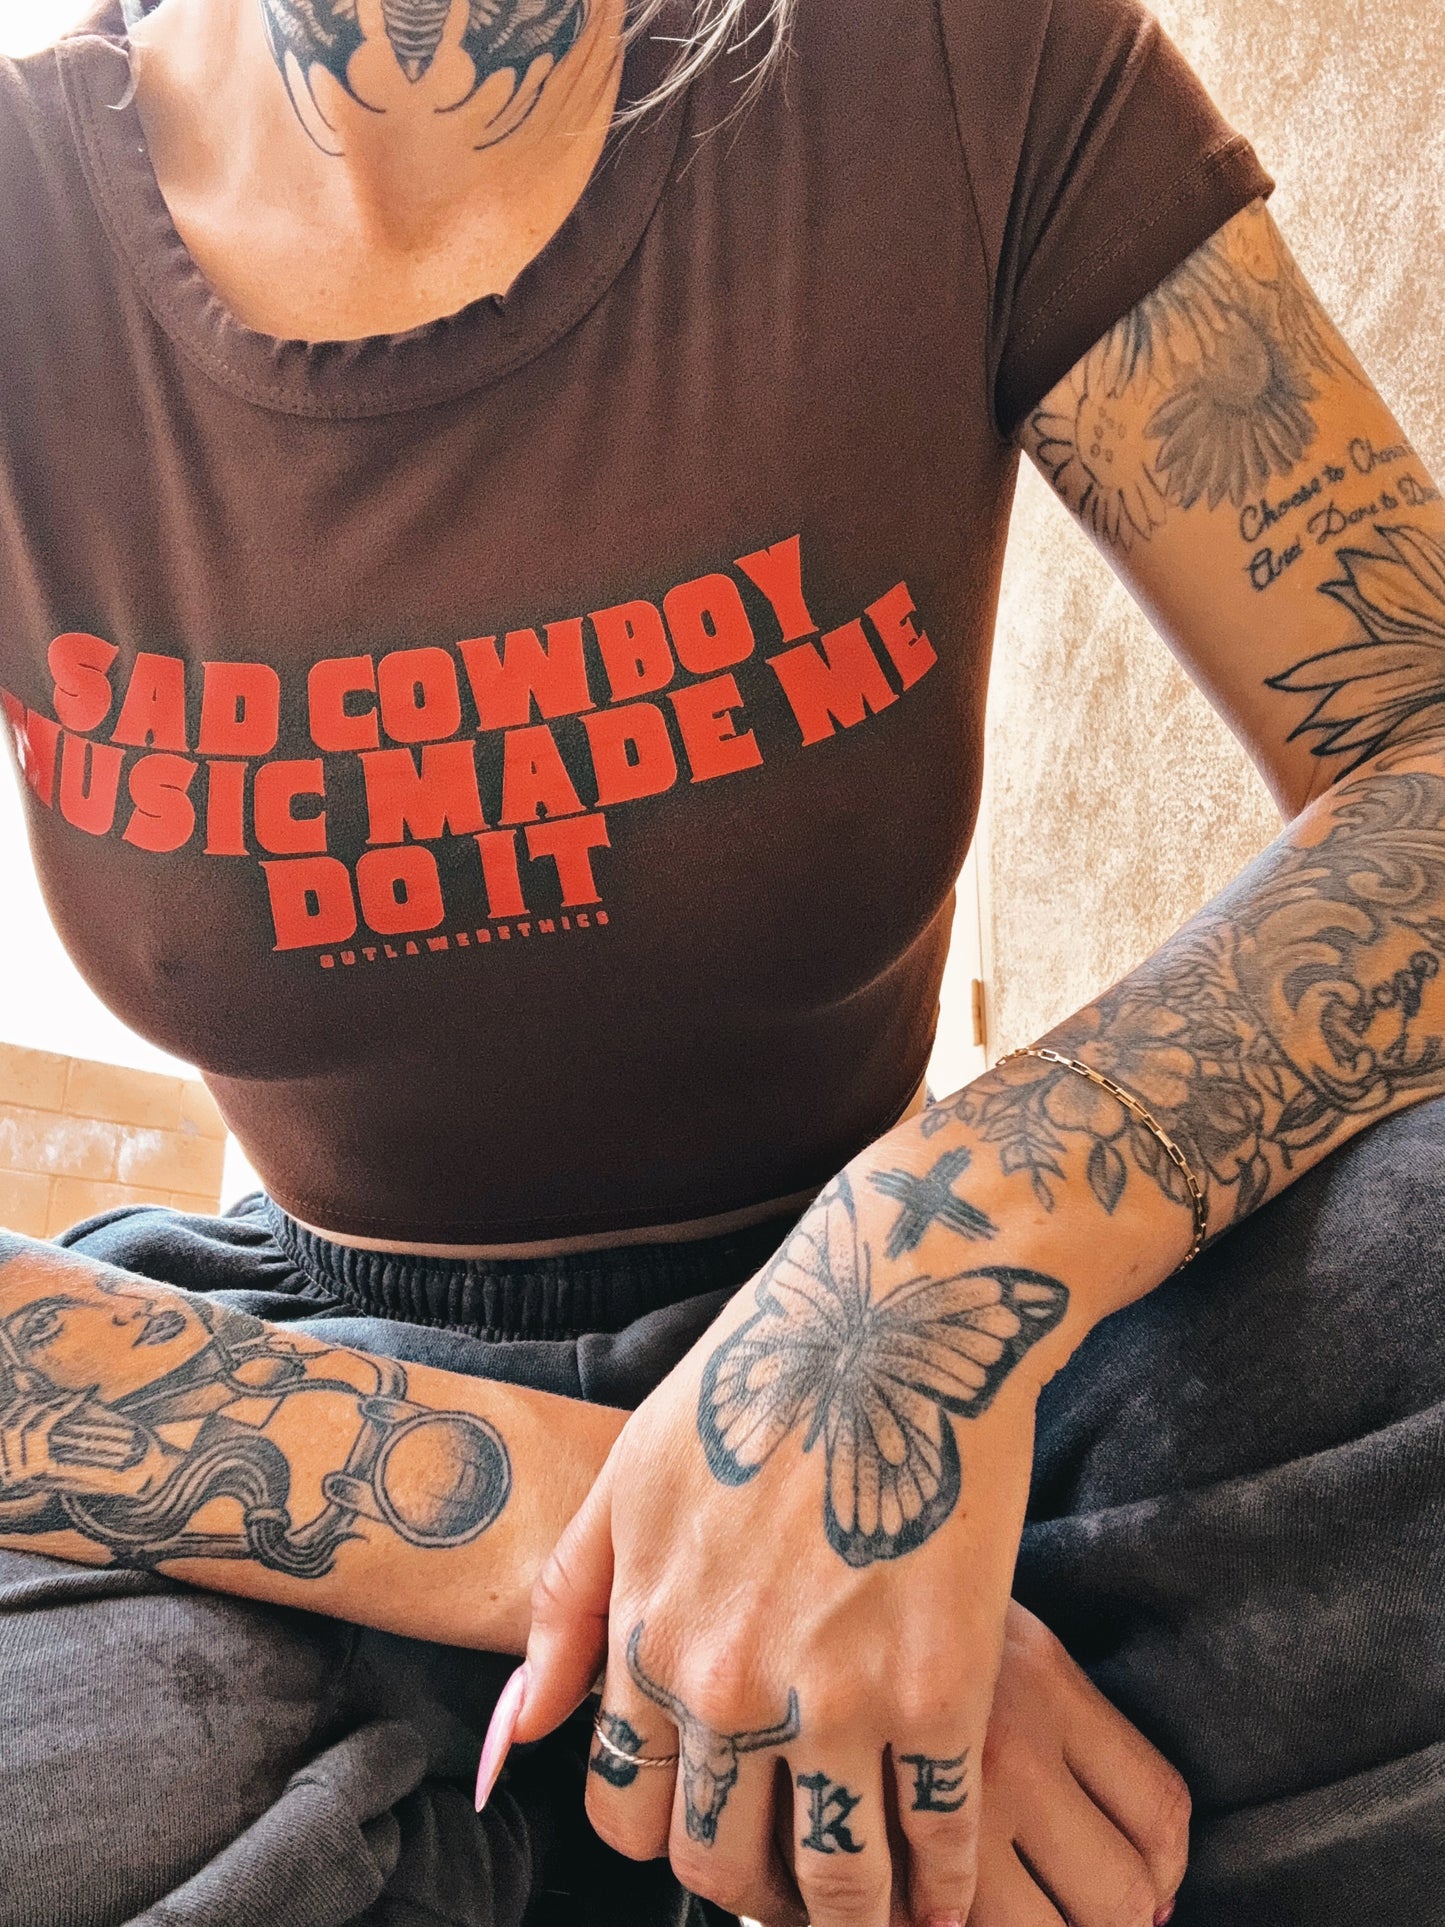 Sad Cowboy Music Made Me Do It Brown Crop Tee Red Lettering